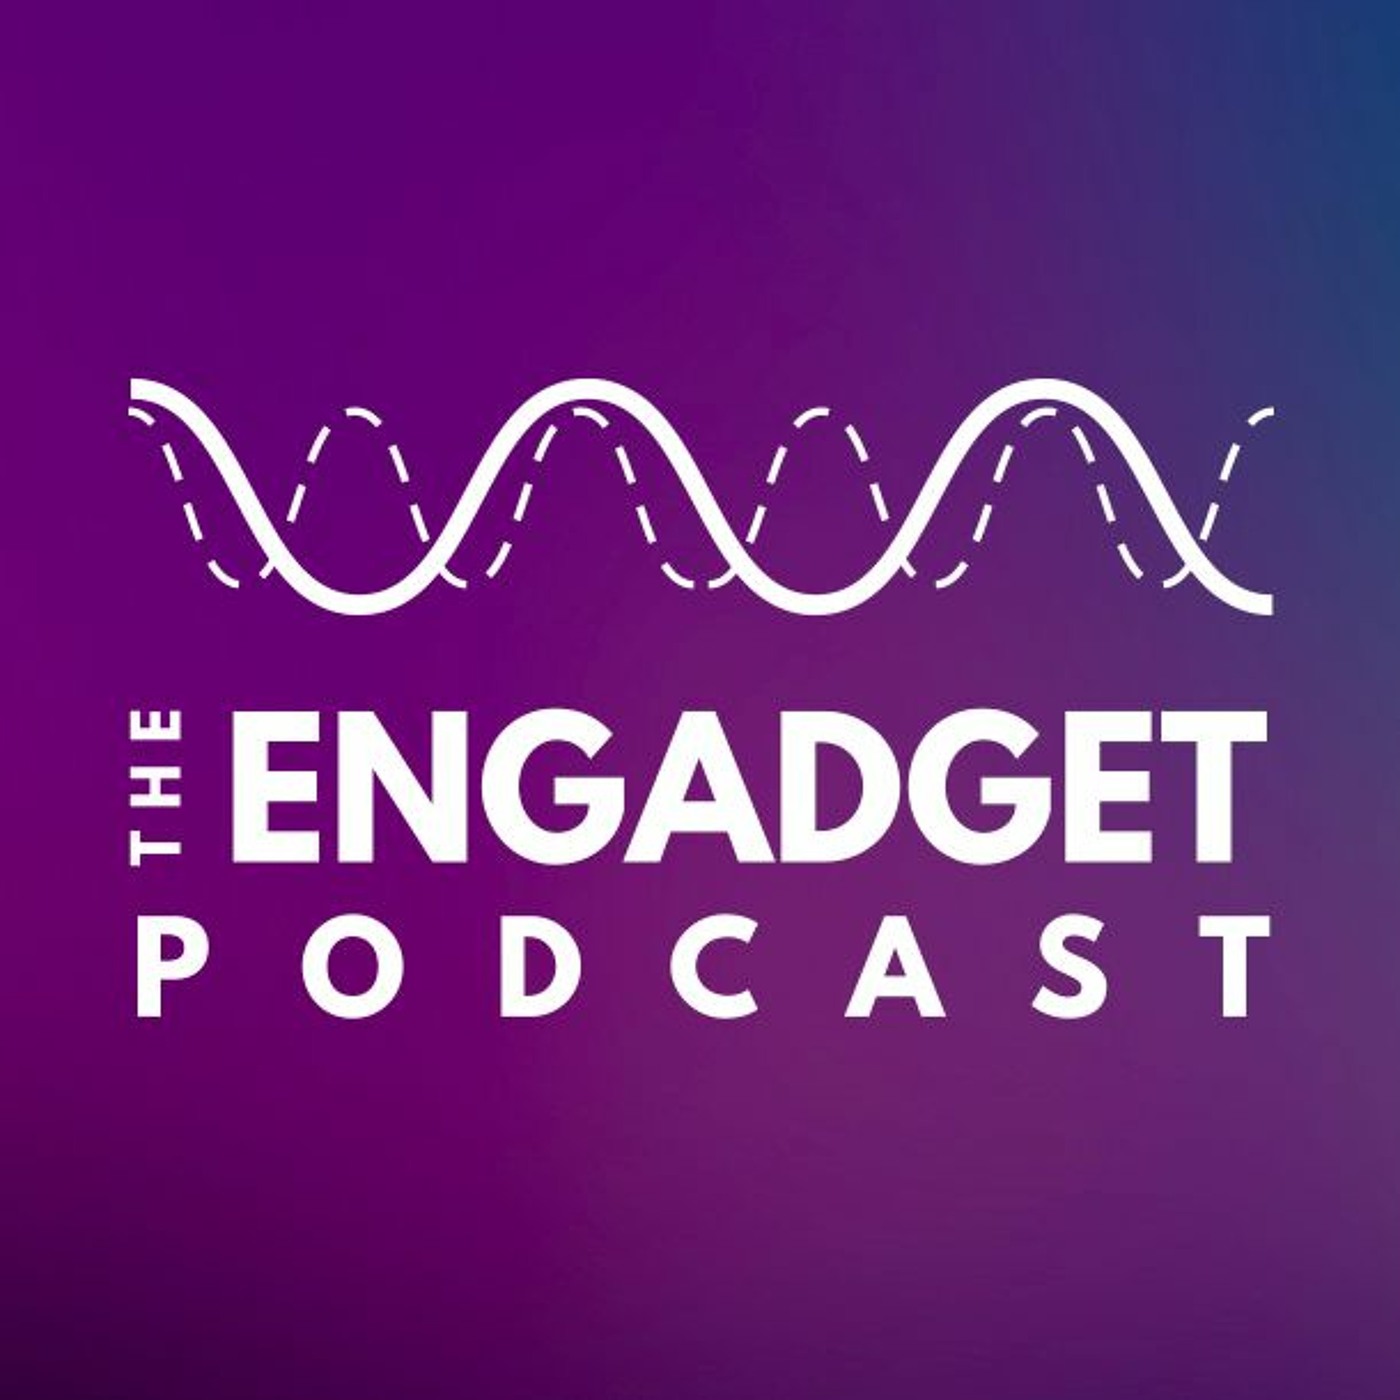 The Engadget Podcast Ep 21: Ooh Las Vegas